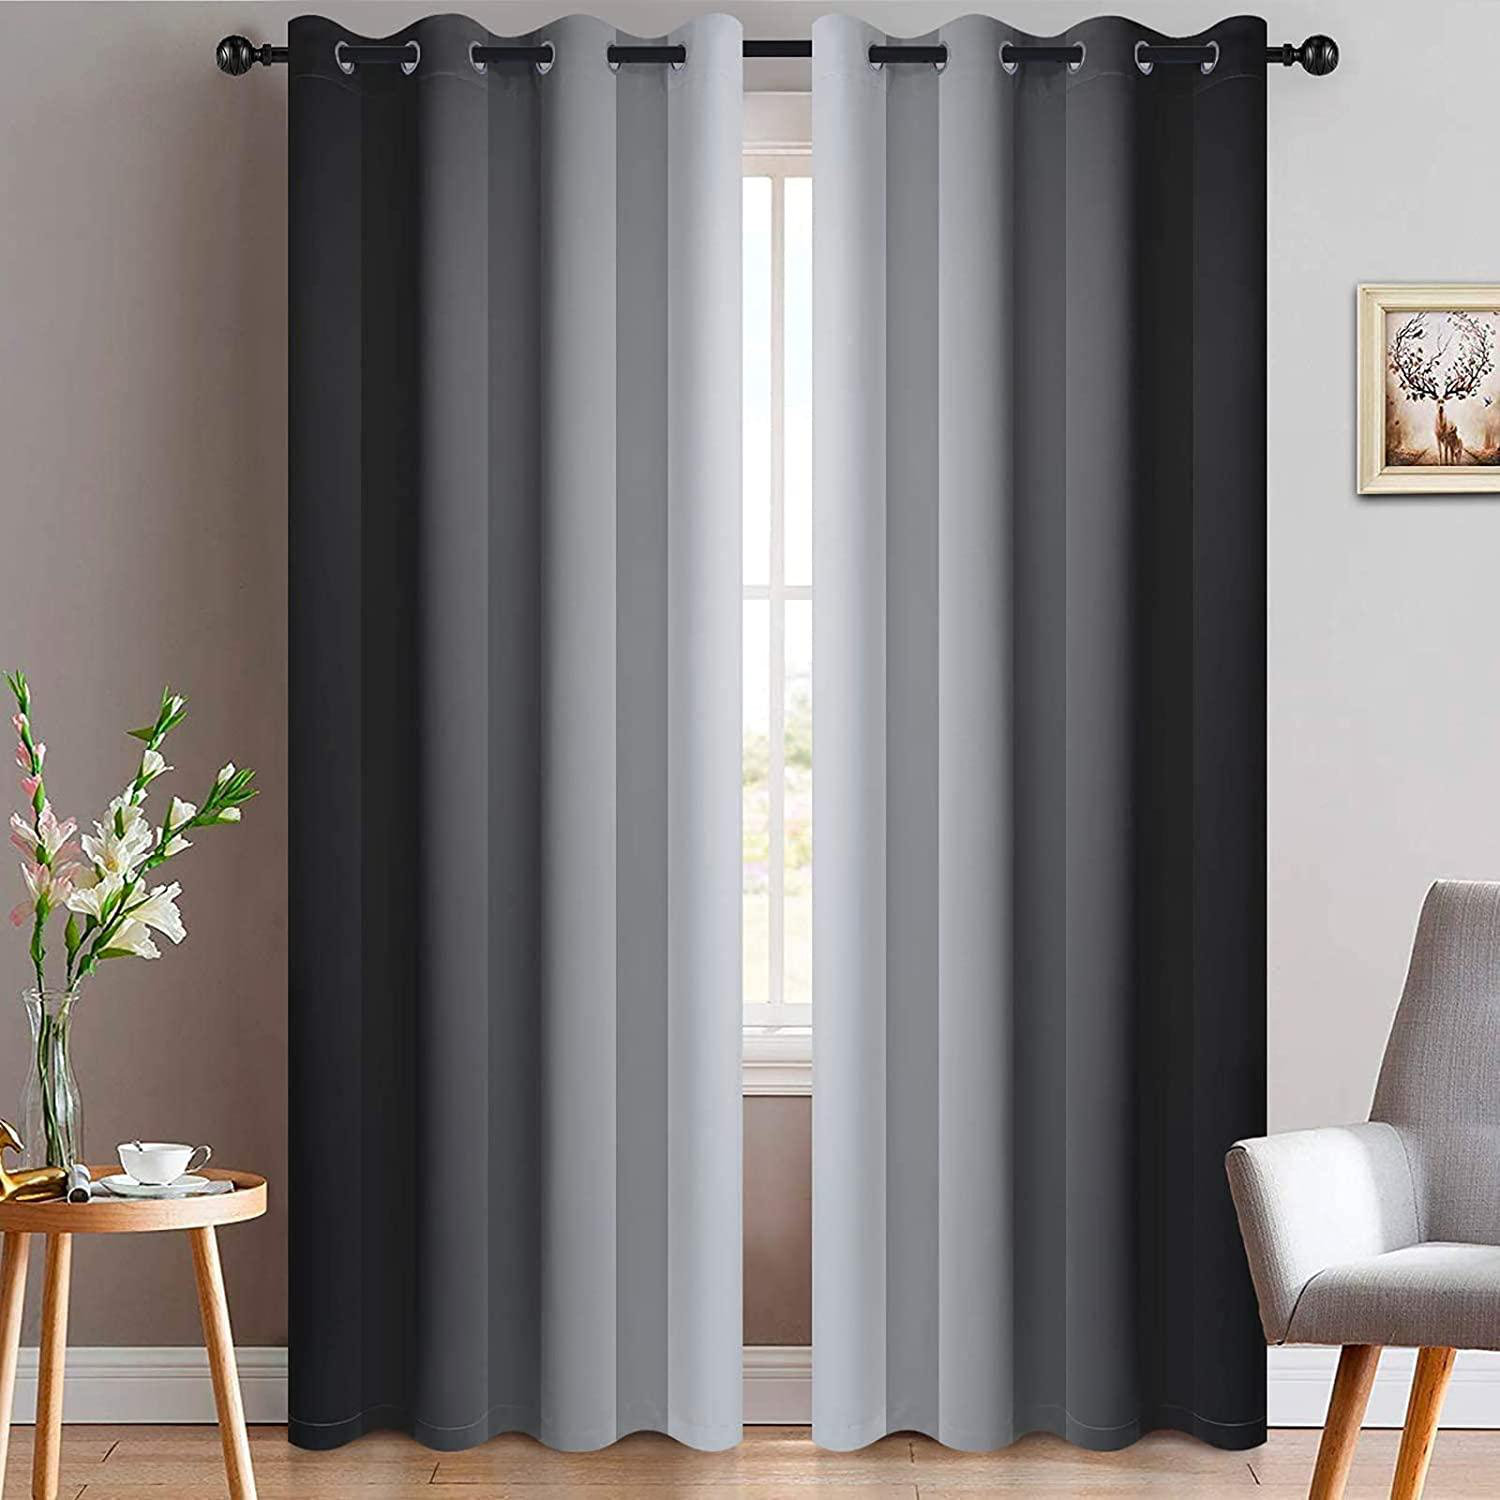 Blackout Curtains 2 Panels for Room Darkening Thermal Insulated Window Dark Blue 